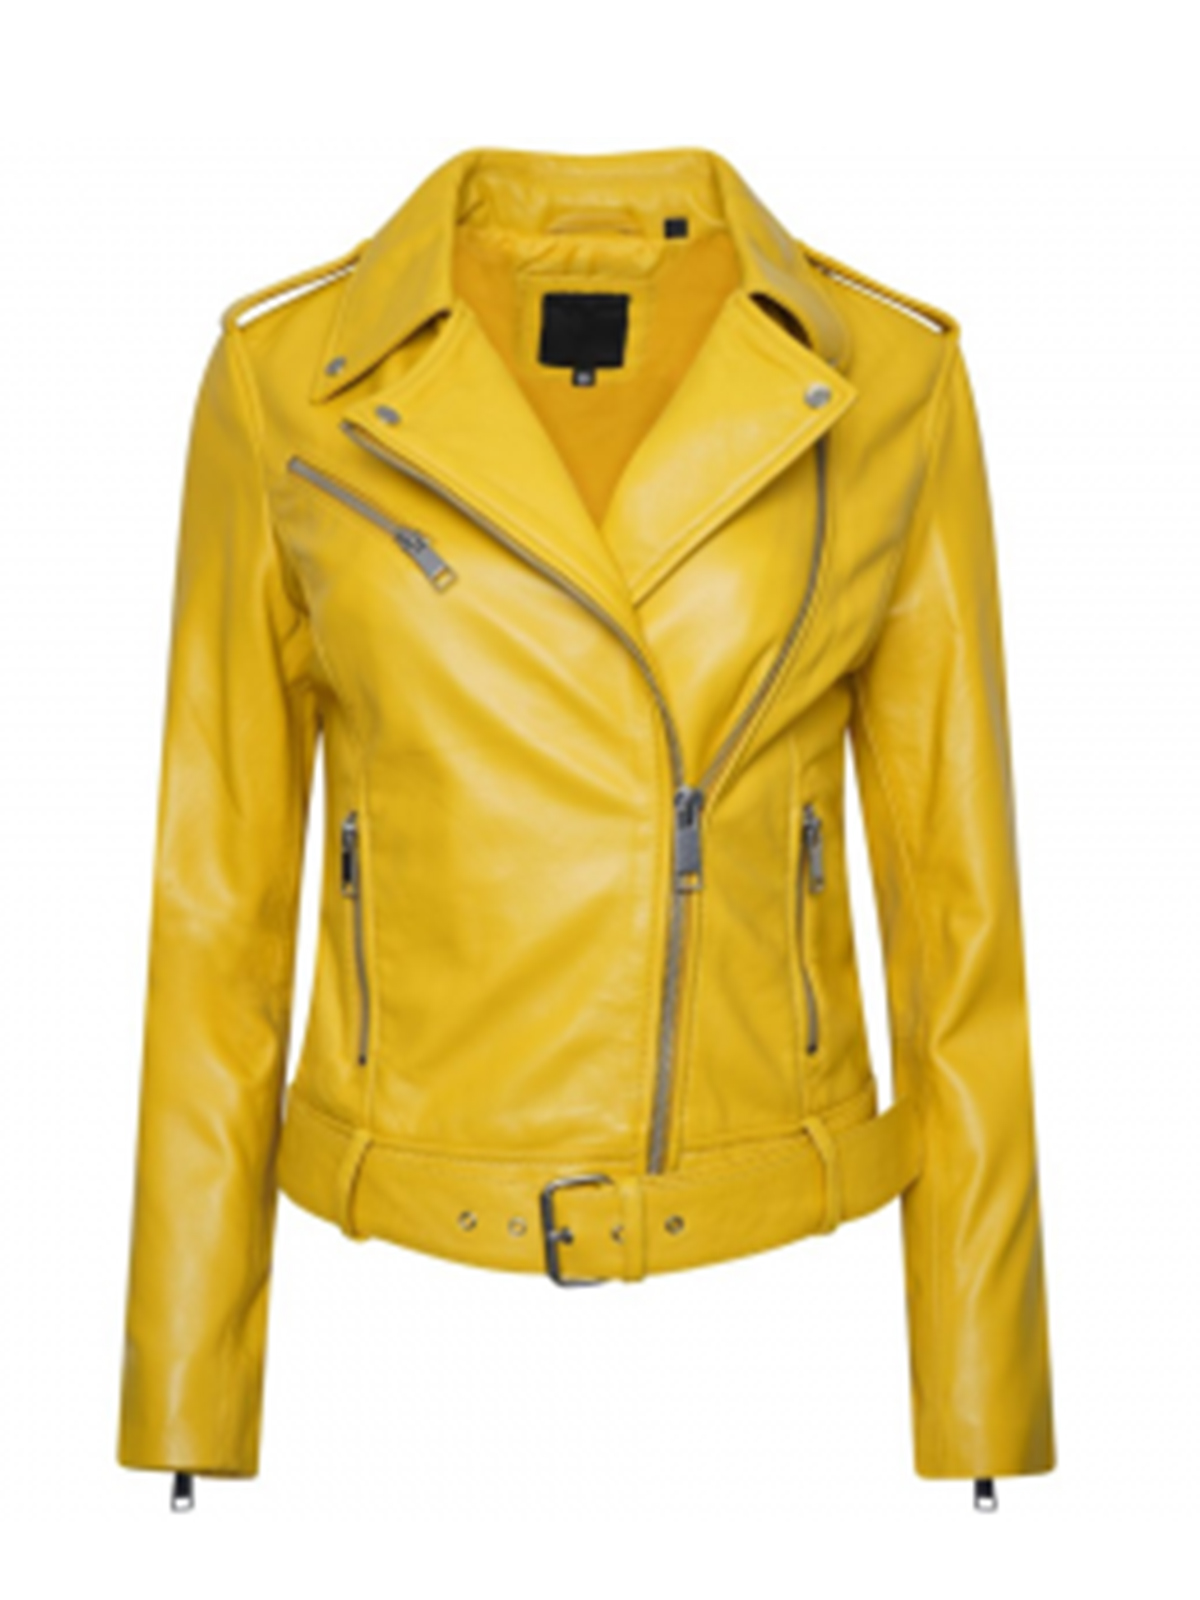 Letty Ortiz Michelle Rodriguez Furious 7 Jacket – Bay Perfect